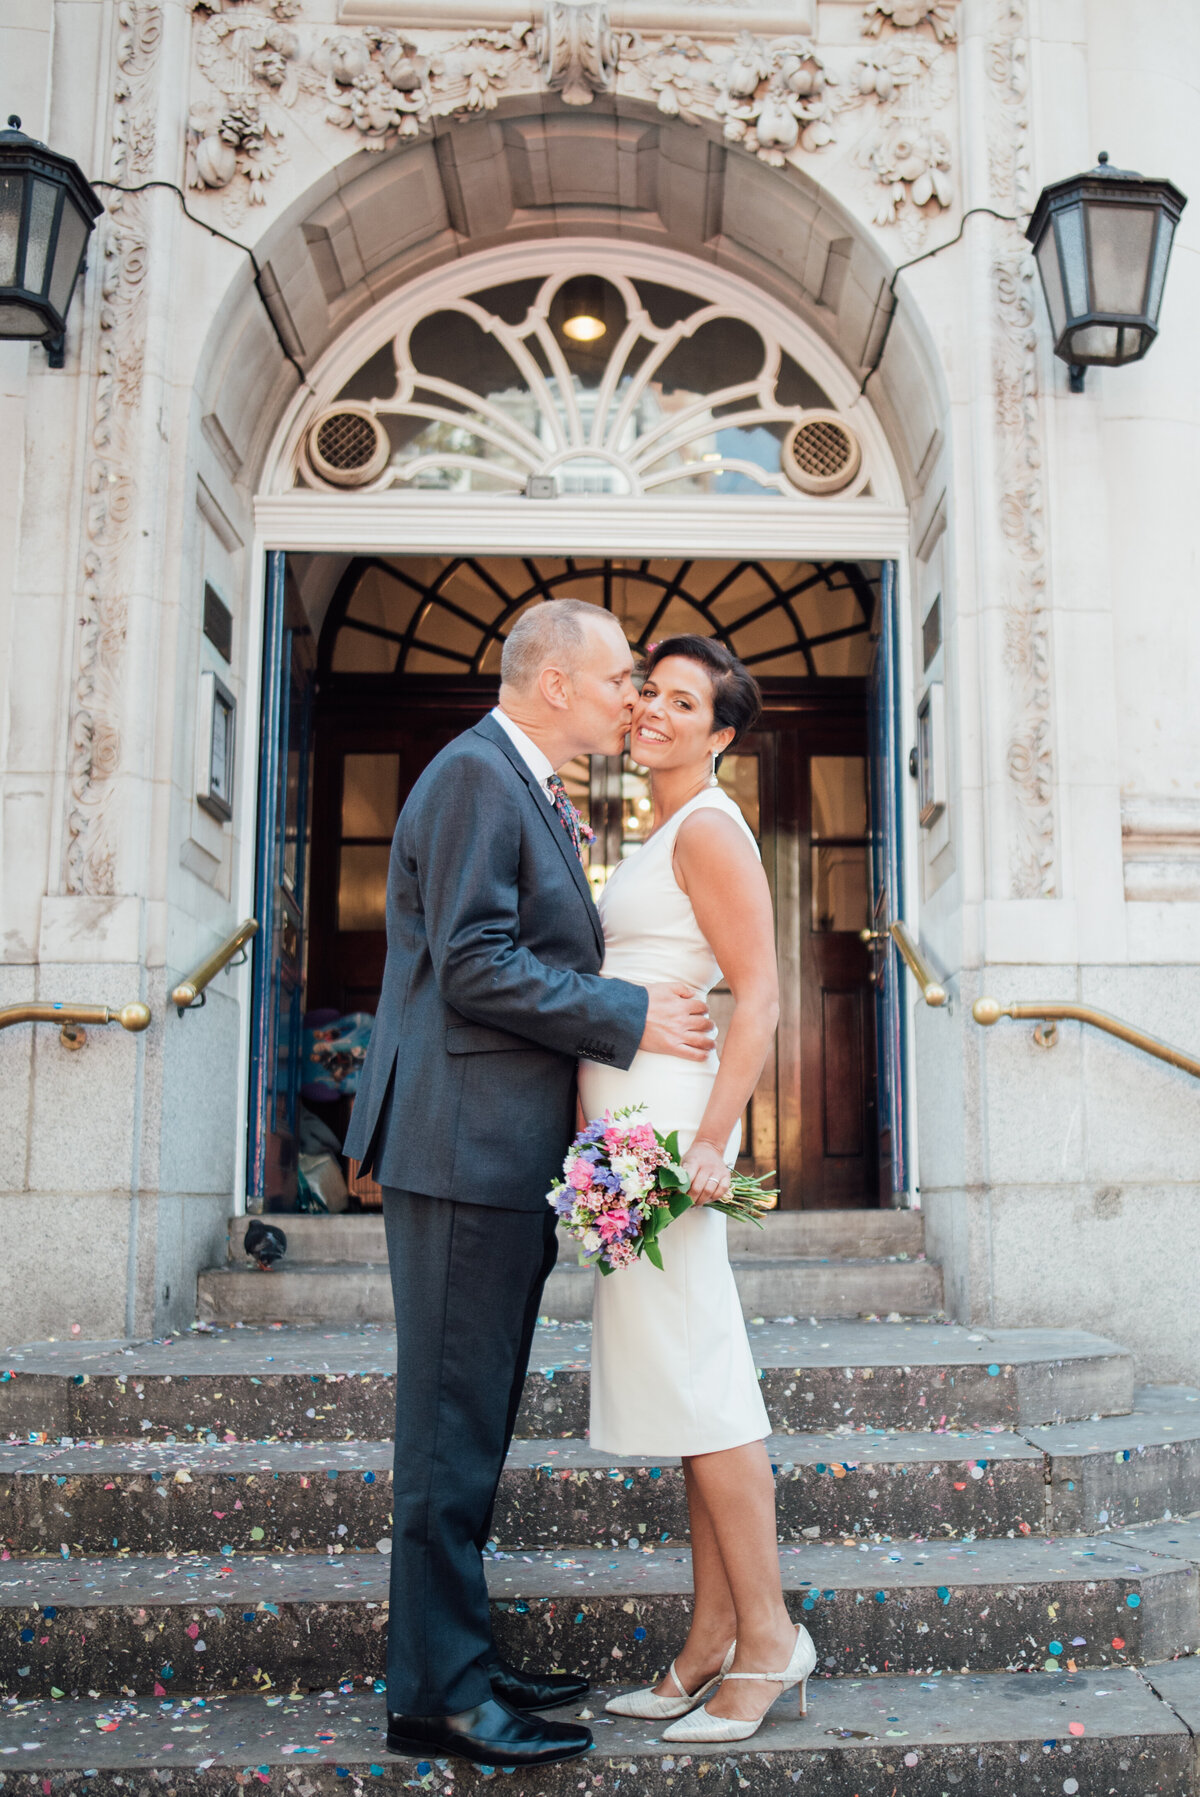 A couple sharing a kiss outside their wedding venue taken by London Wedding Photographer Liberty Pearl